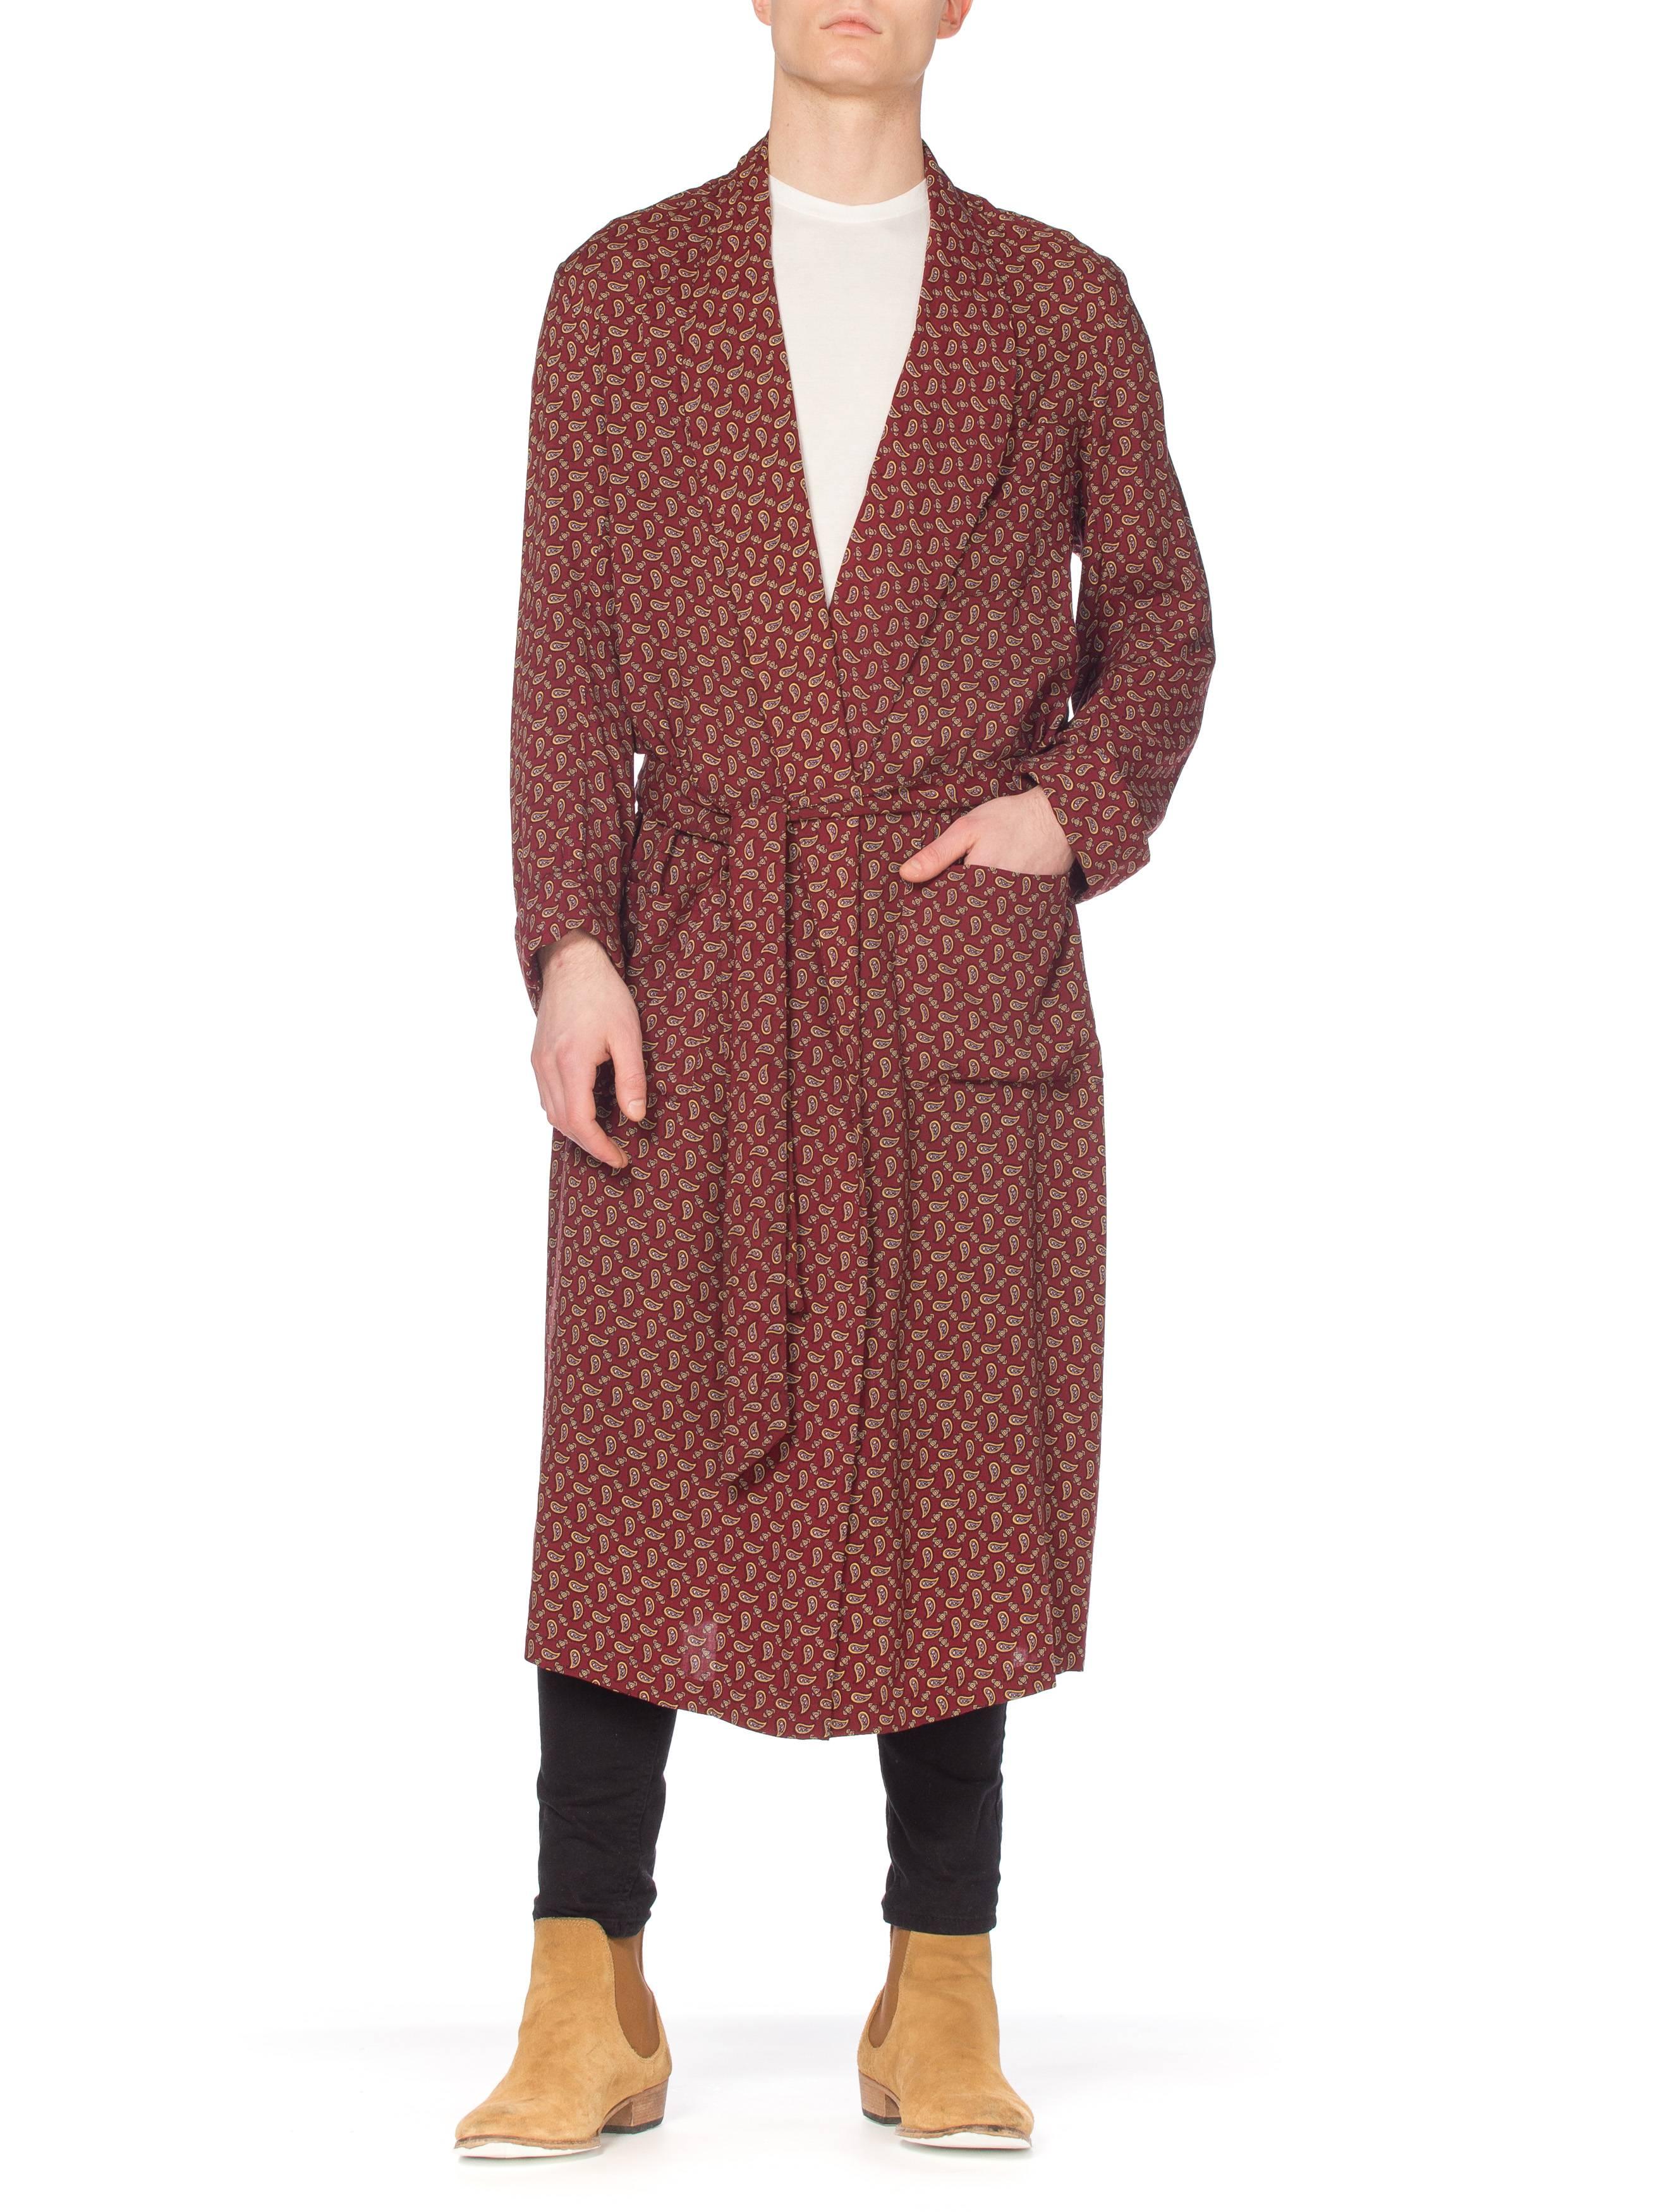 1950S Burgundy Paisley Rayon Robe Made In England In Excellent Condition For Sale In New York, NY